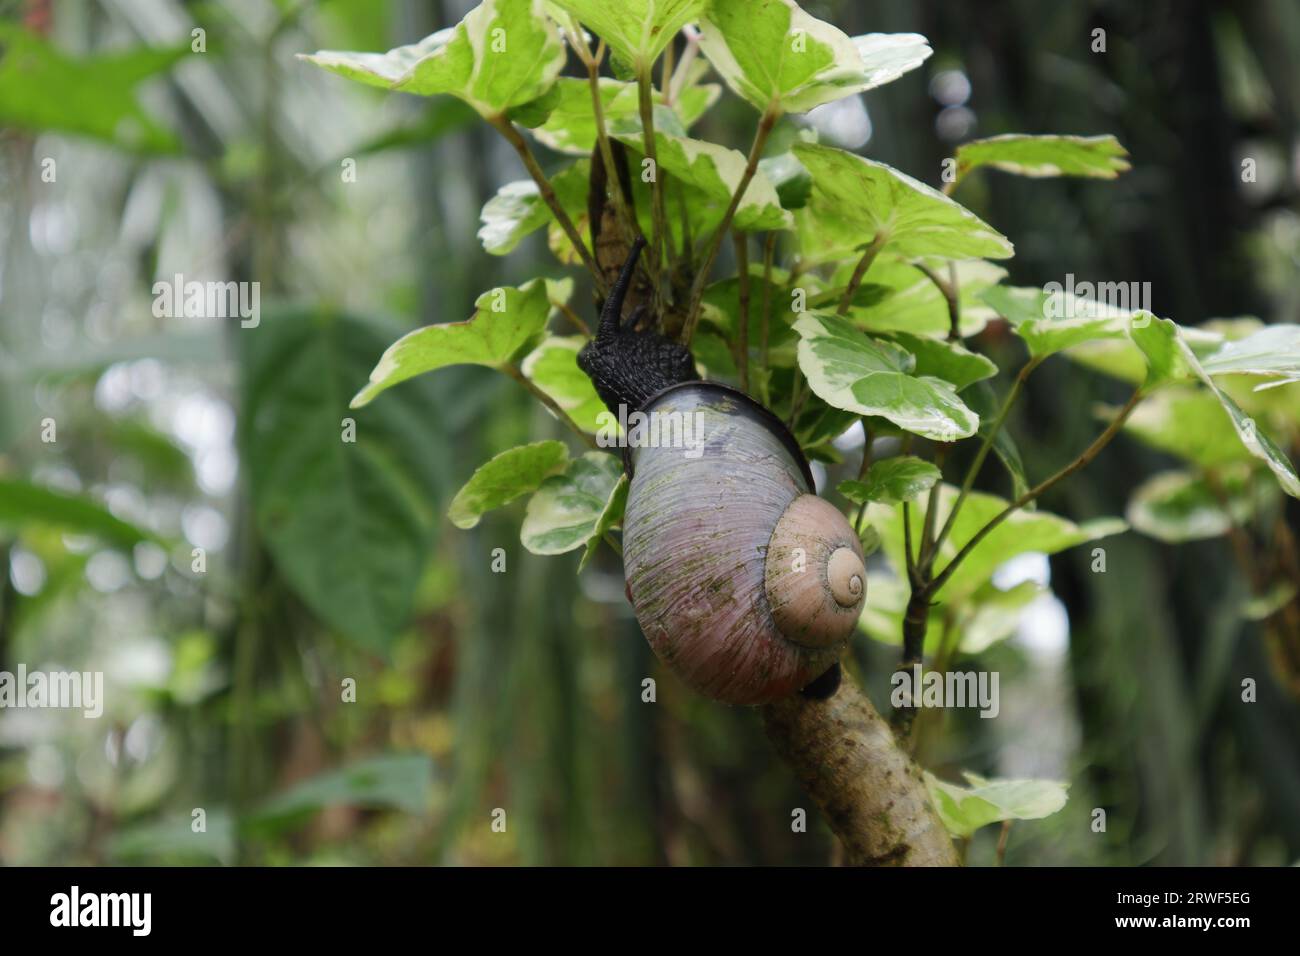 An endemic Giant land snail (Acavus Phoenix) is crawling up on a stem of a Dinner Plate Aralia plant (Polyscias Balfouriana) Stock Photo